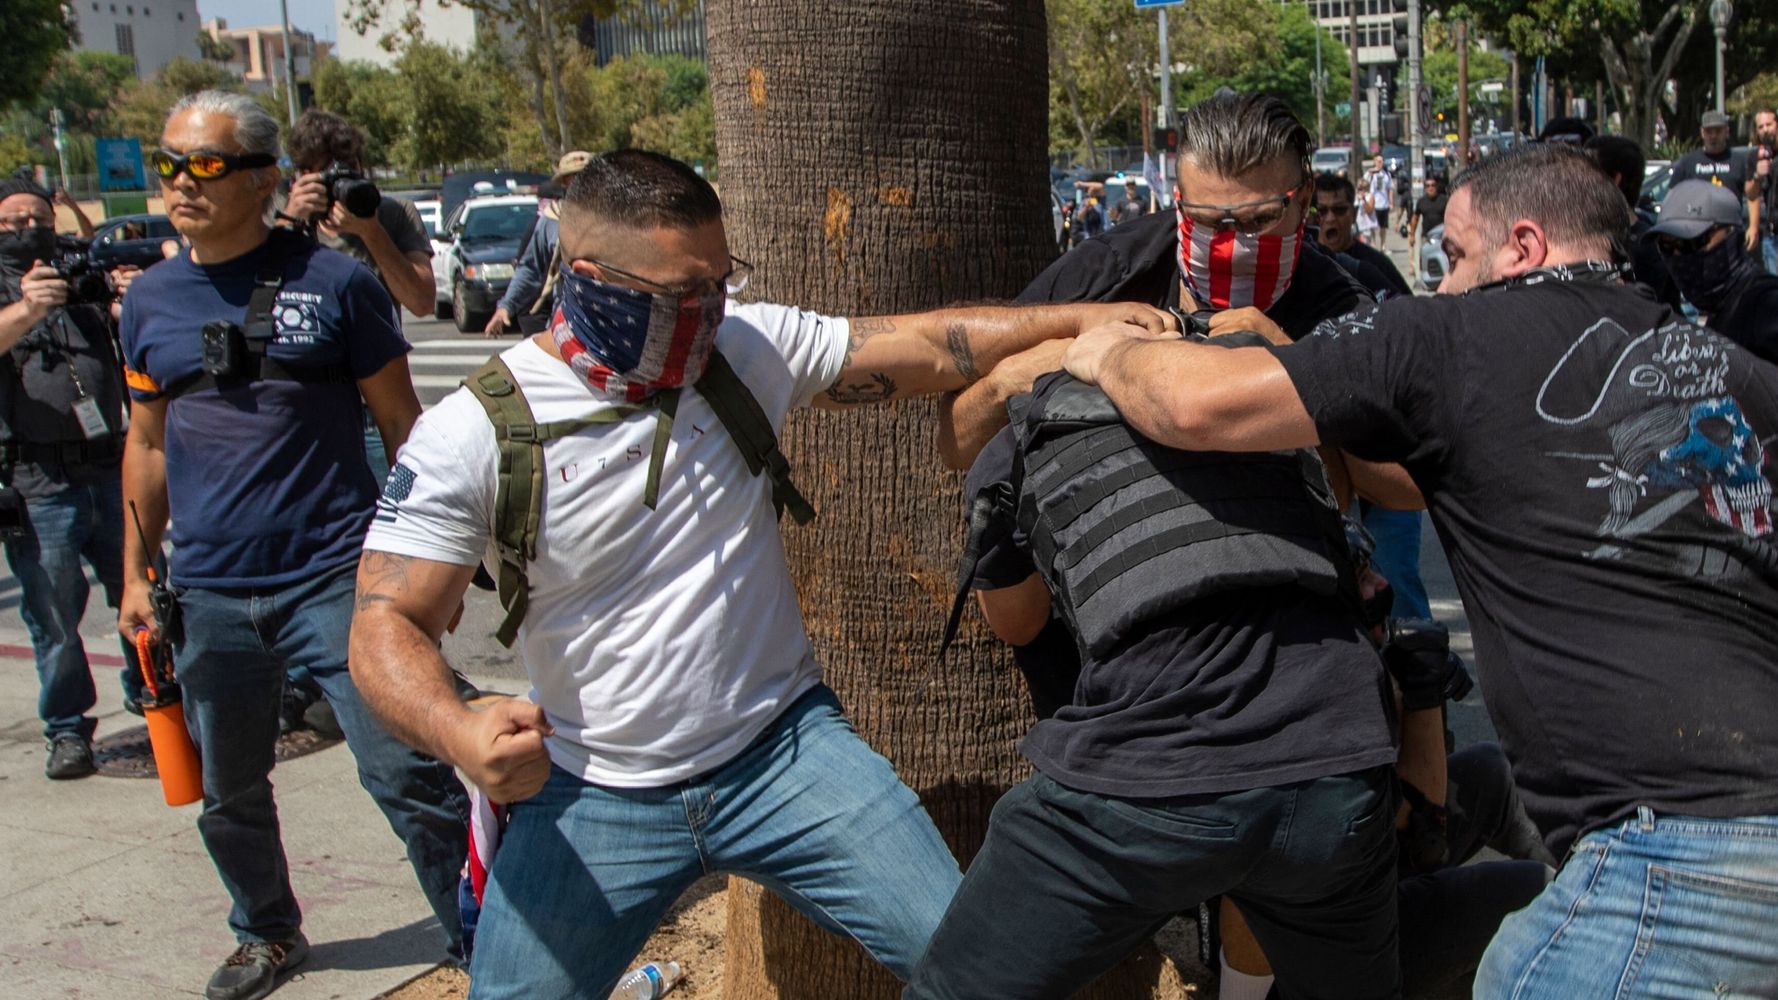 Anti-Vaxxer Videotaped Attacking Journalist At Los Angeles Protest Is Linked To Capitol Riot